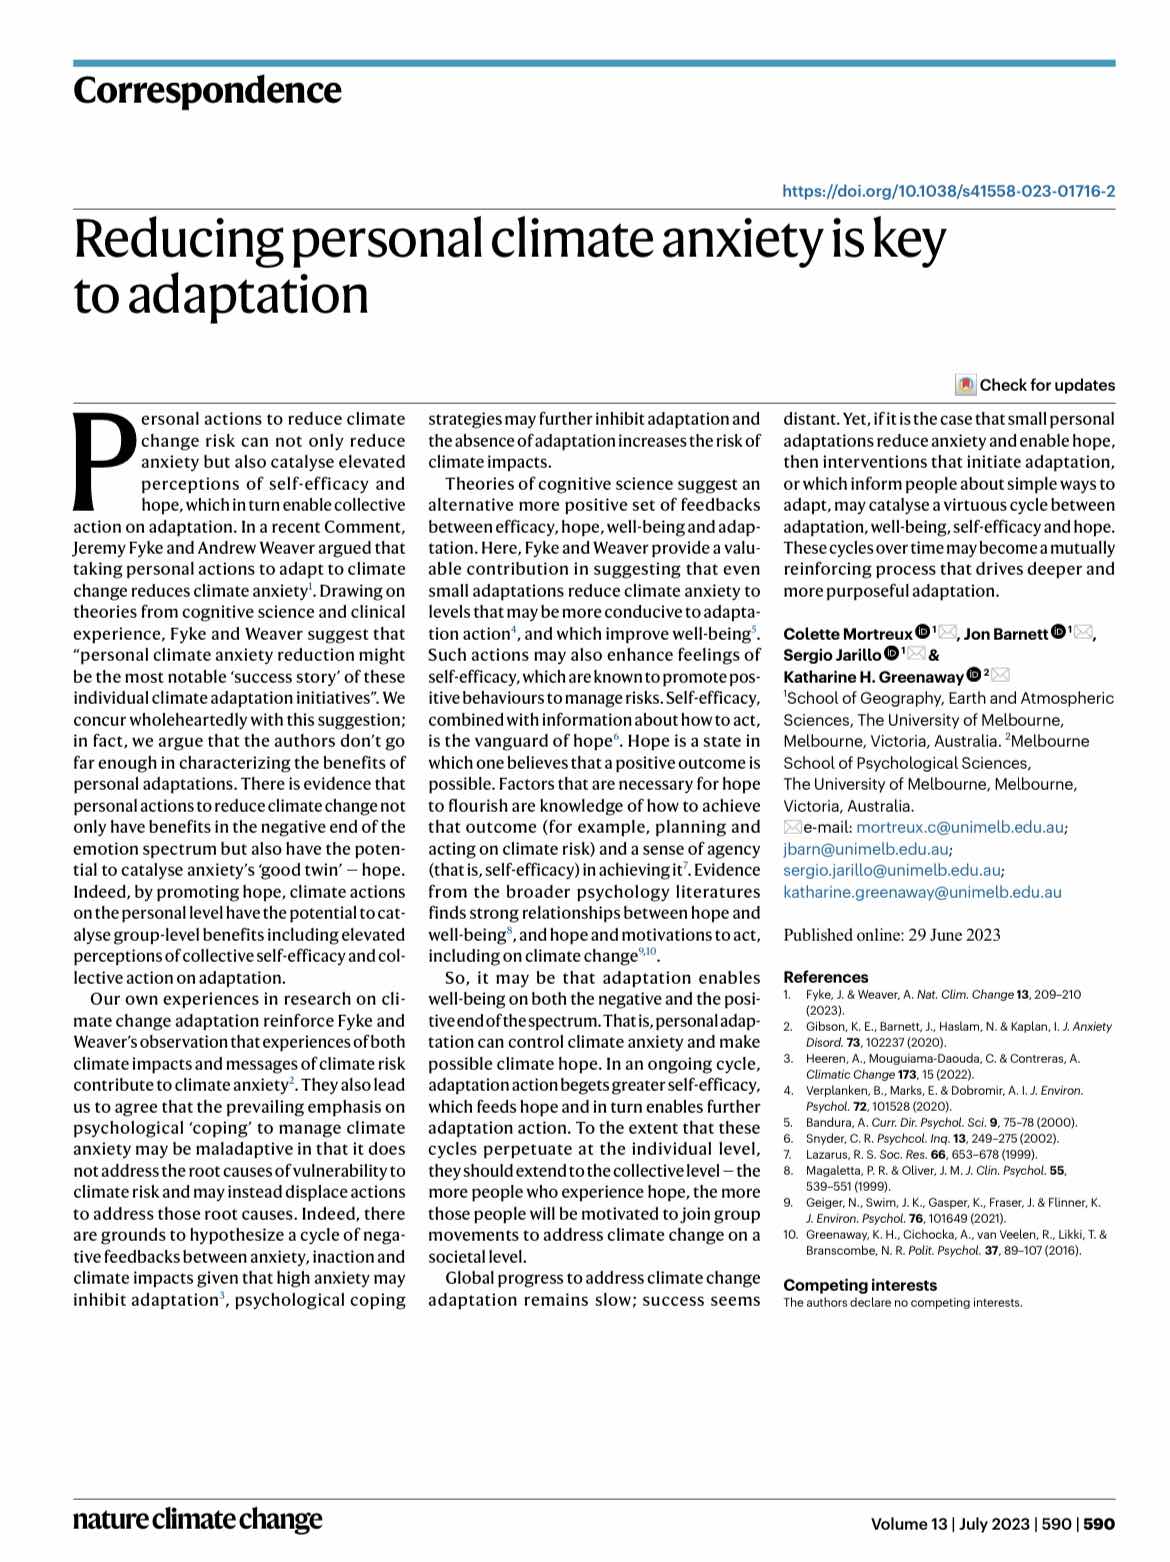 "Reducing personal climate anxiety is key to adaptation"